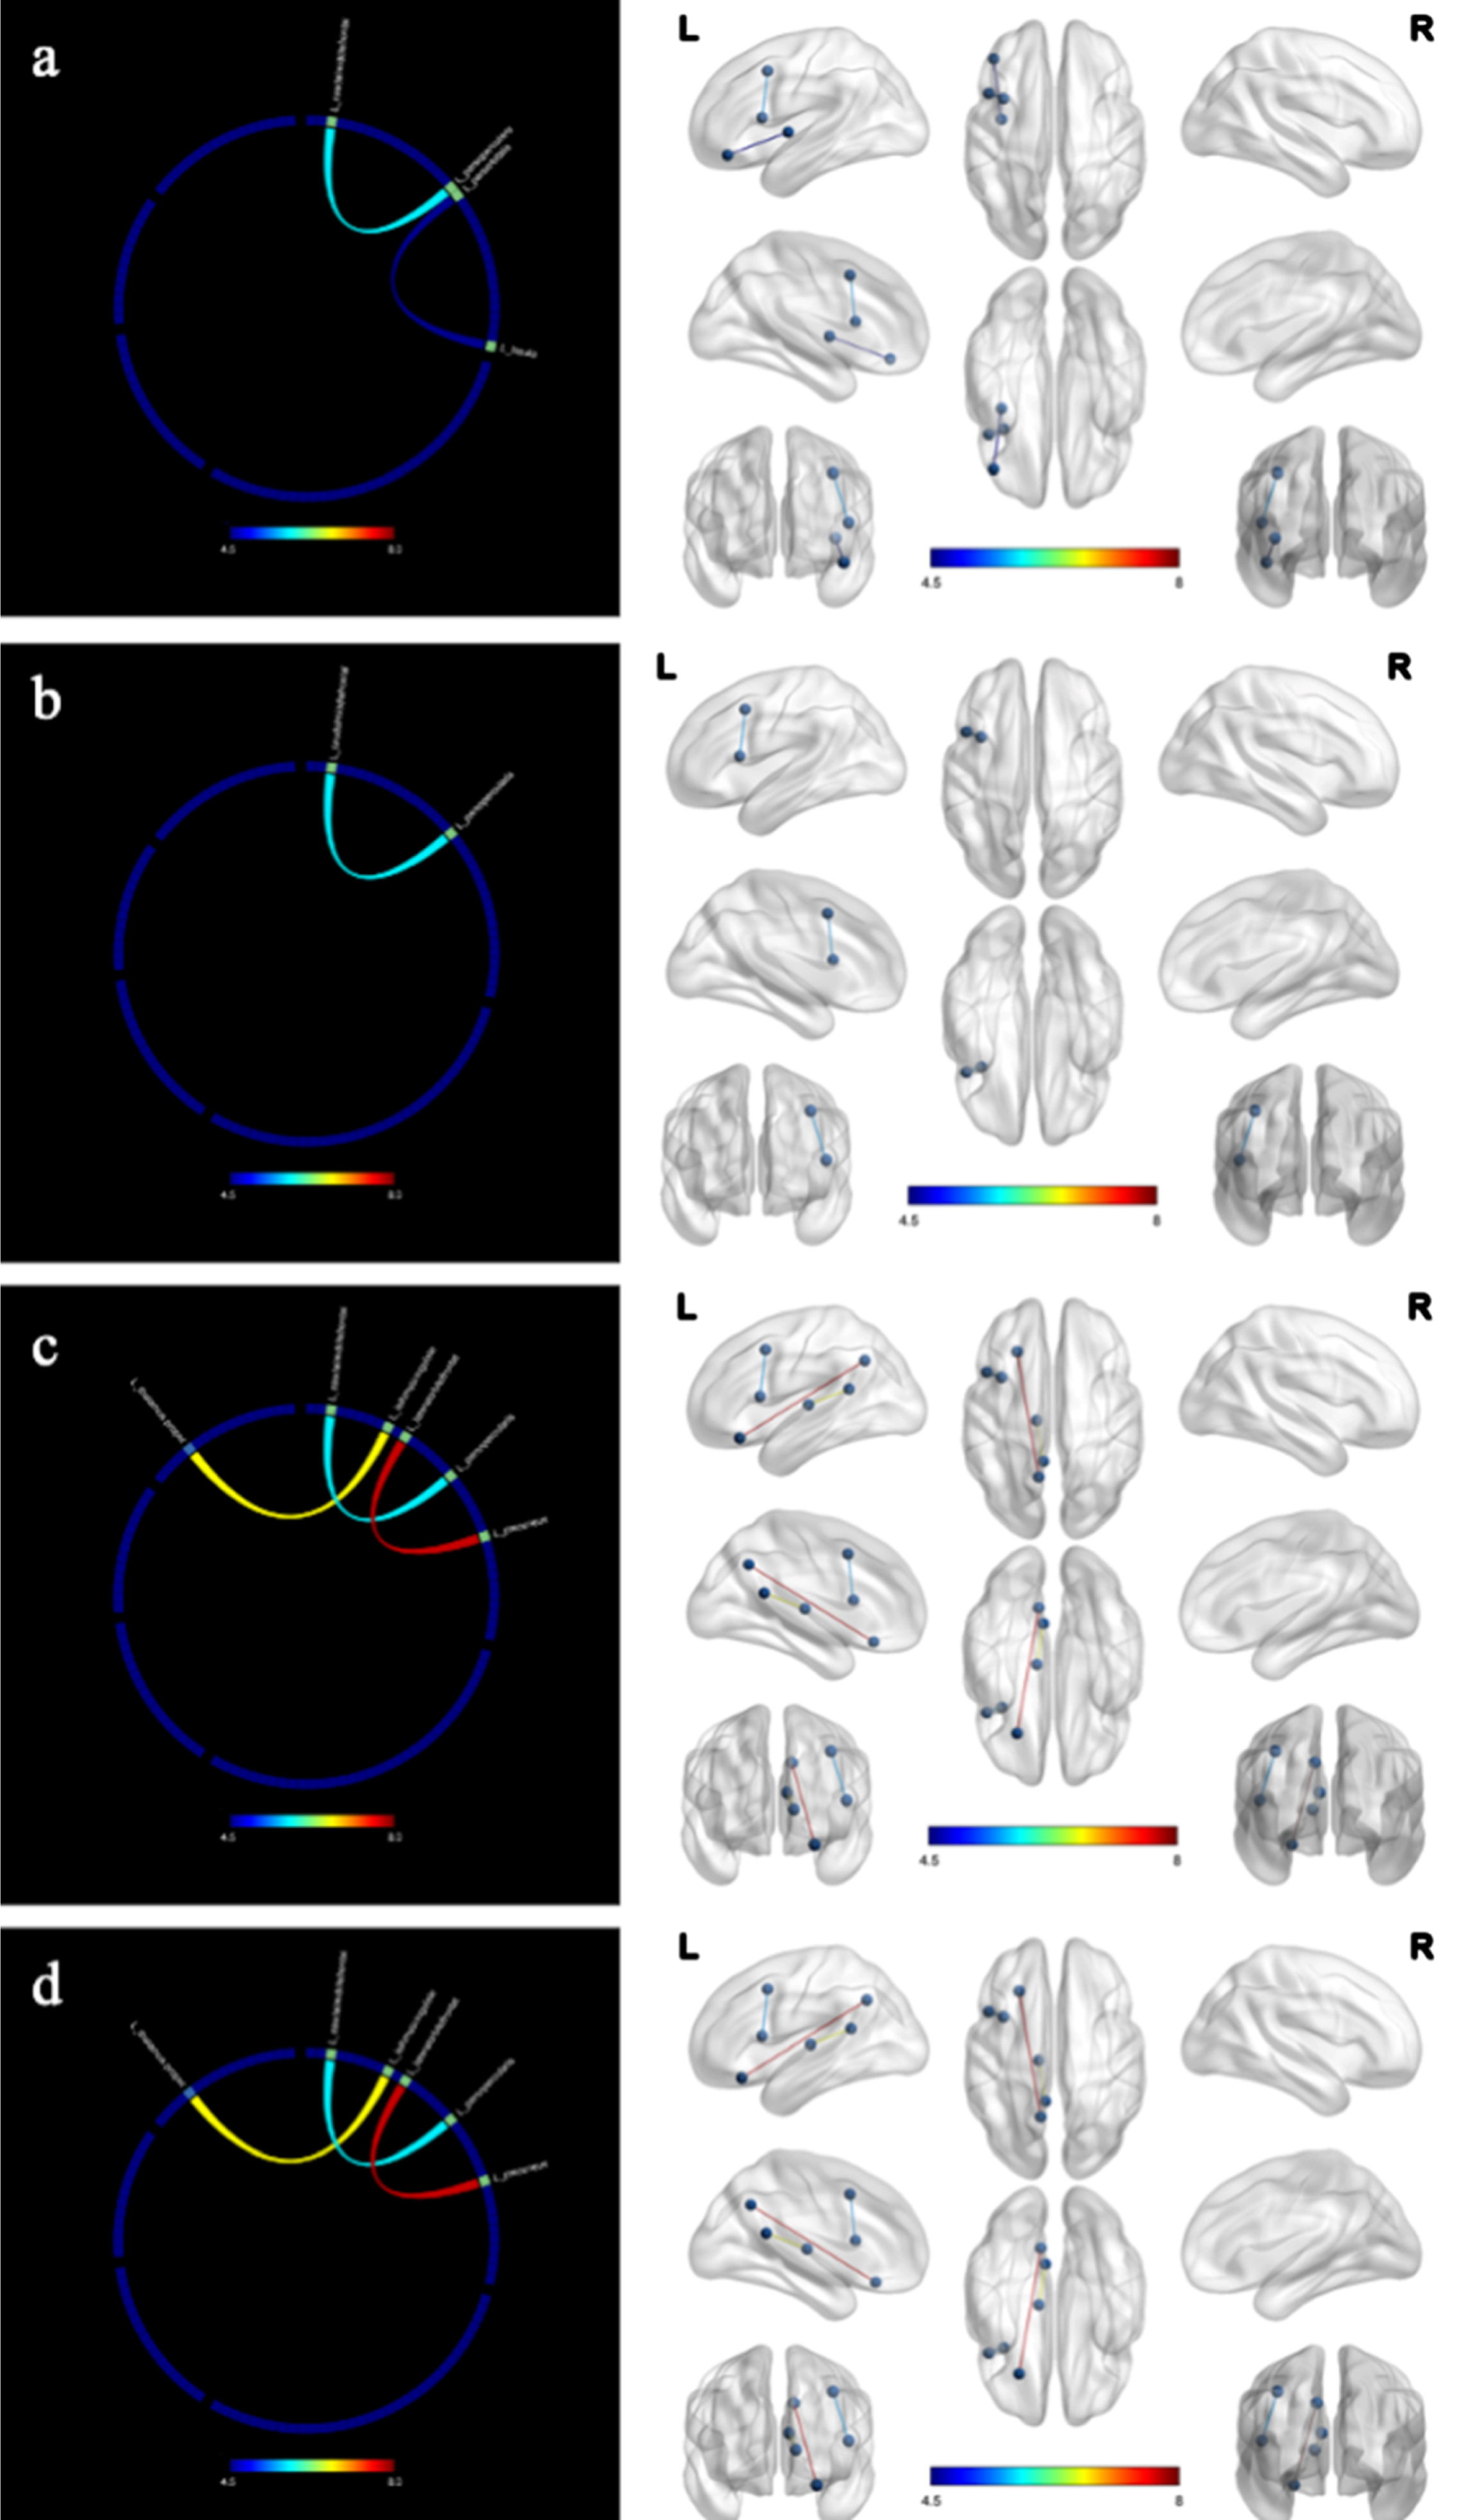 Changes in structural connectivity (diffusion-weighted imaging) after the intervention. a) language; b) executive; c) memory; d) recall; L, left; R, right. The intervention group showed improved in structural connectivity compared to the control group. The marked color of connecting line in the figure indicates the F value.